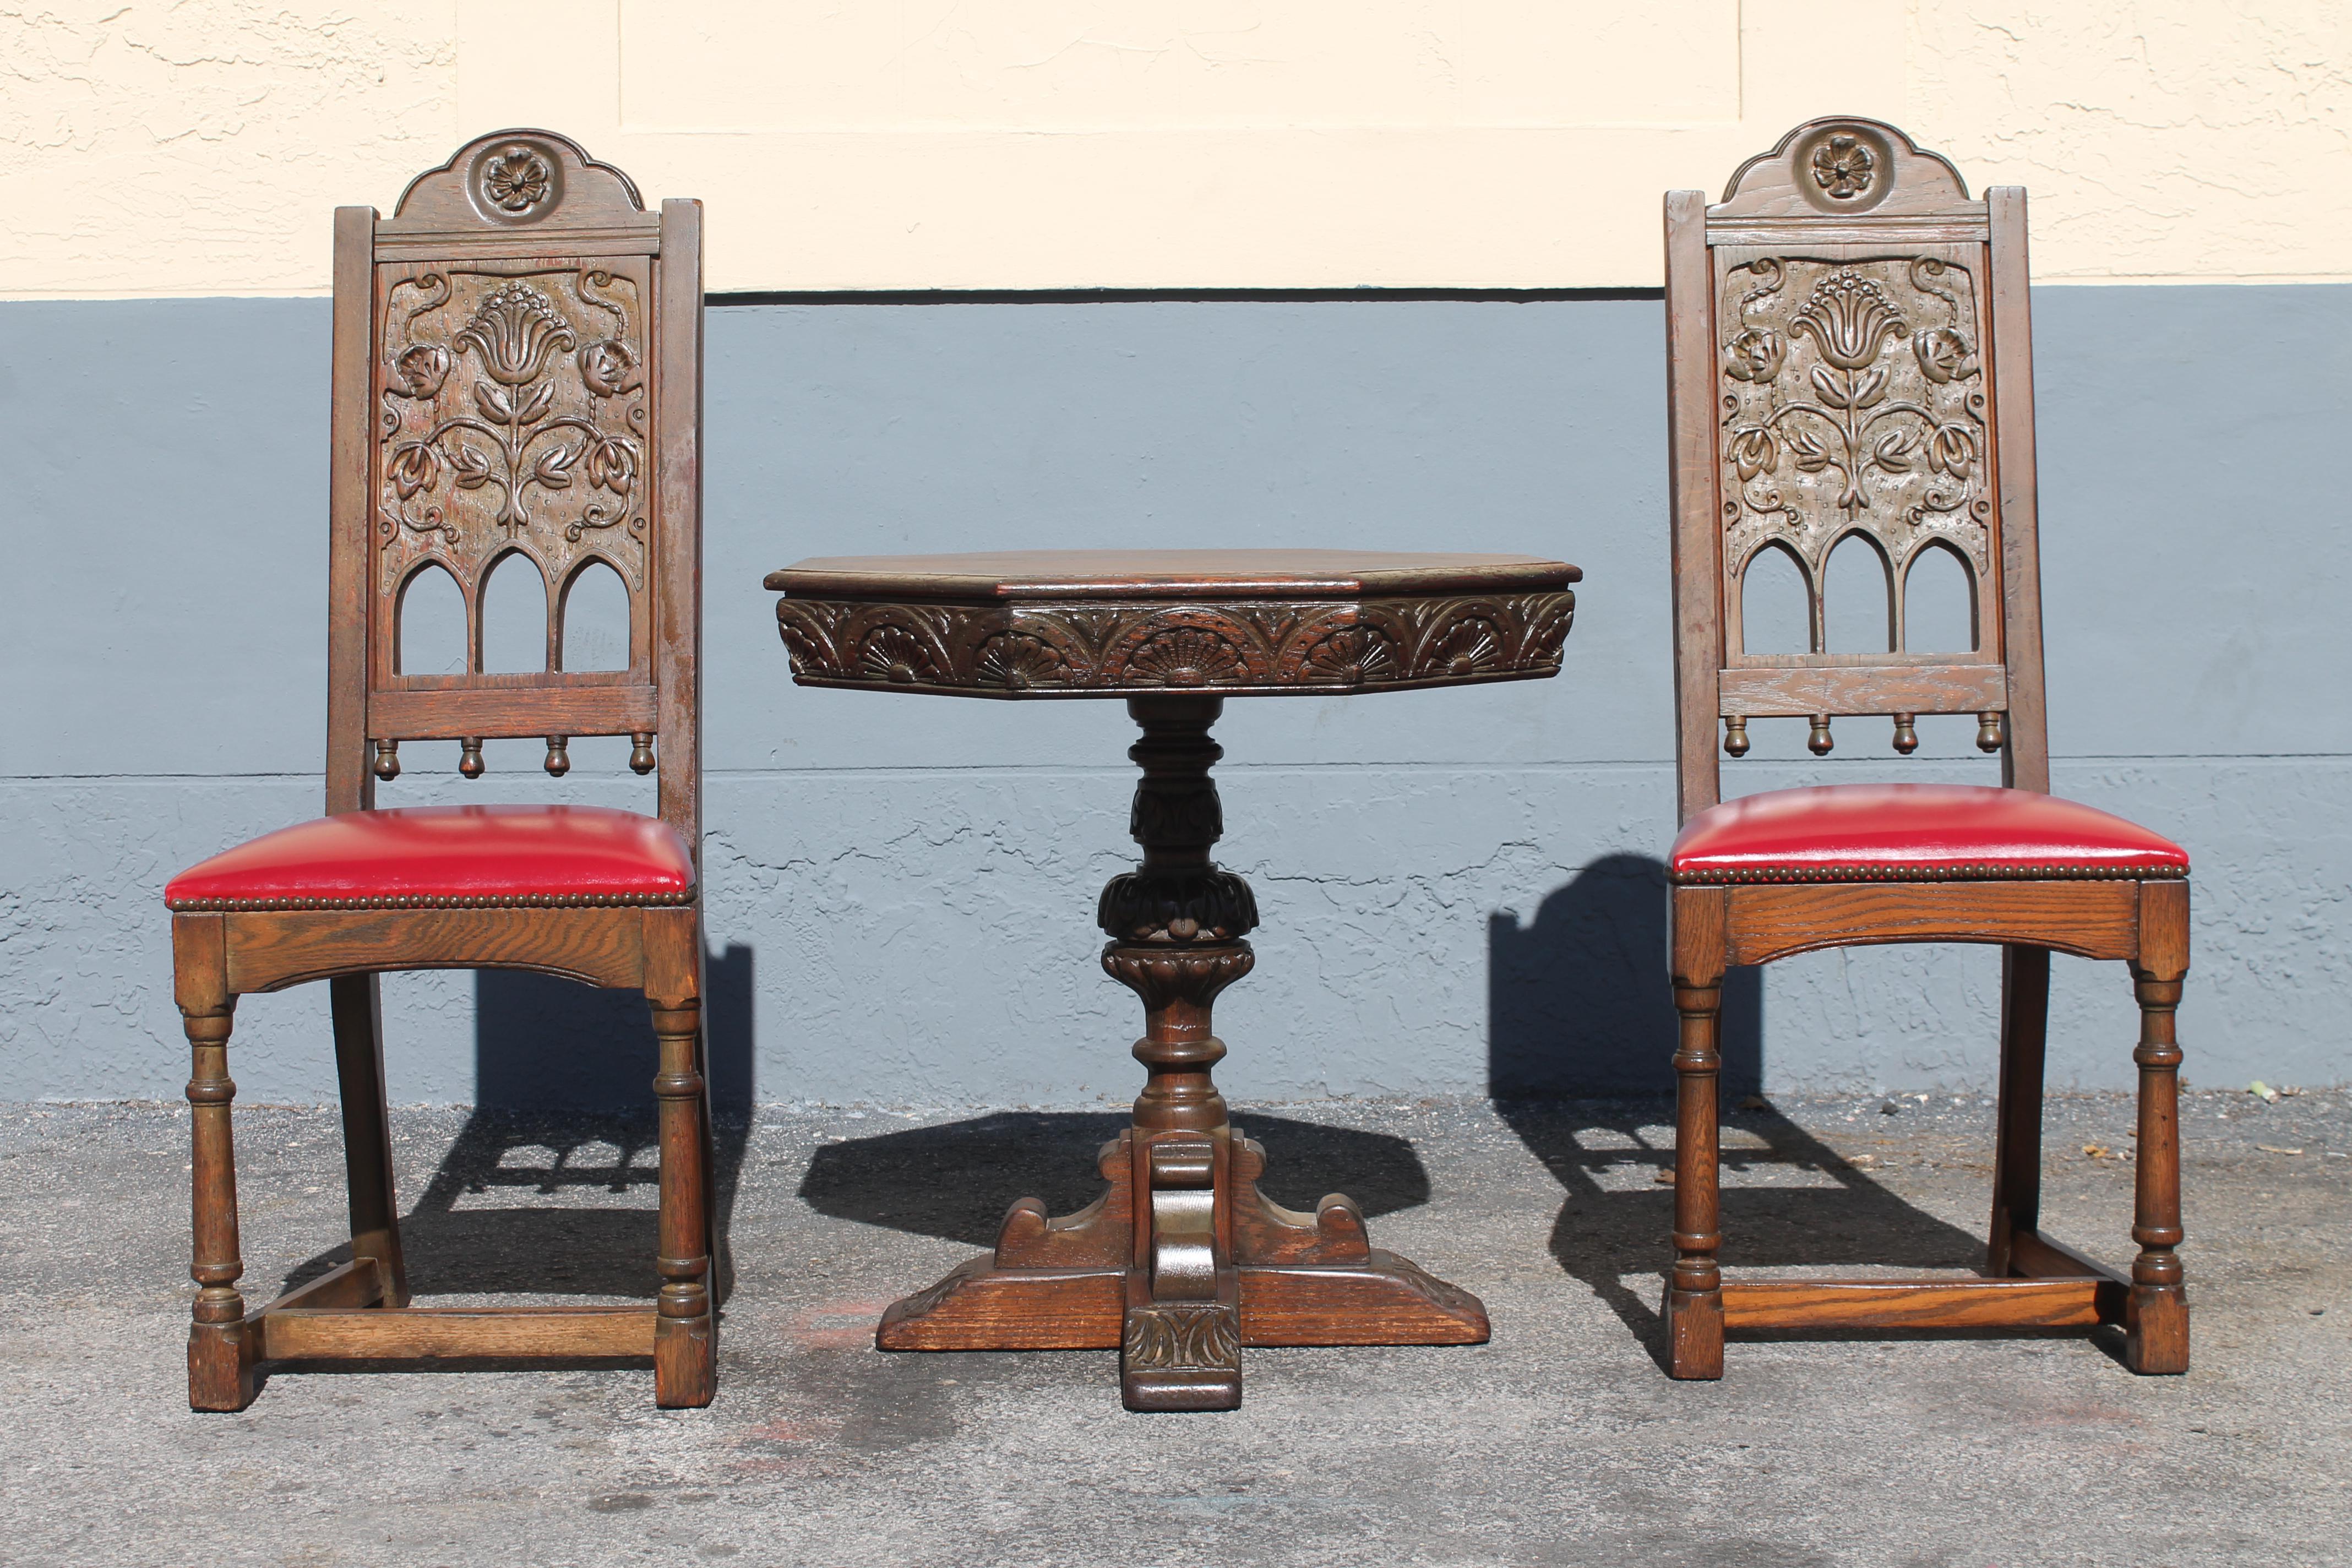 19thc French Rennaisance Revival Carved Center Table + Pair Chairs  Set of 3 pcs For Sale 6